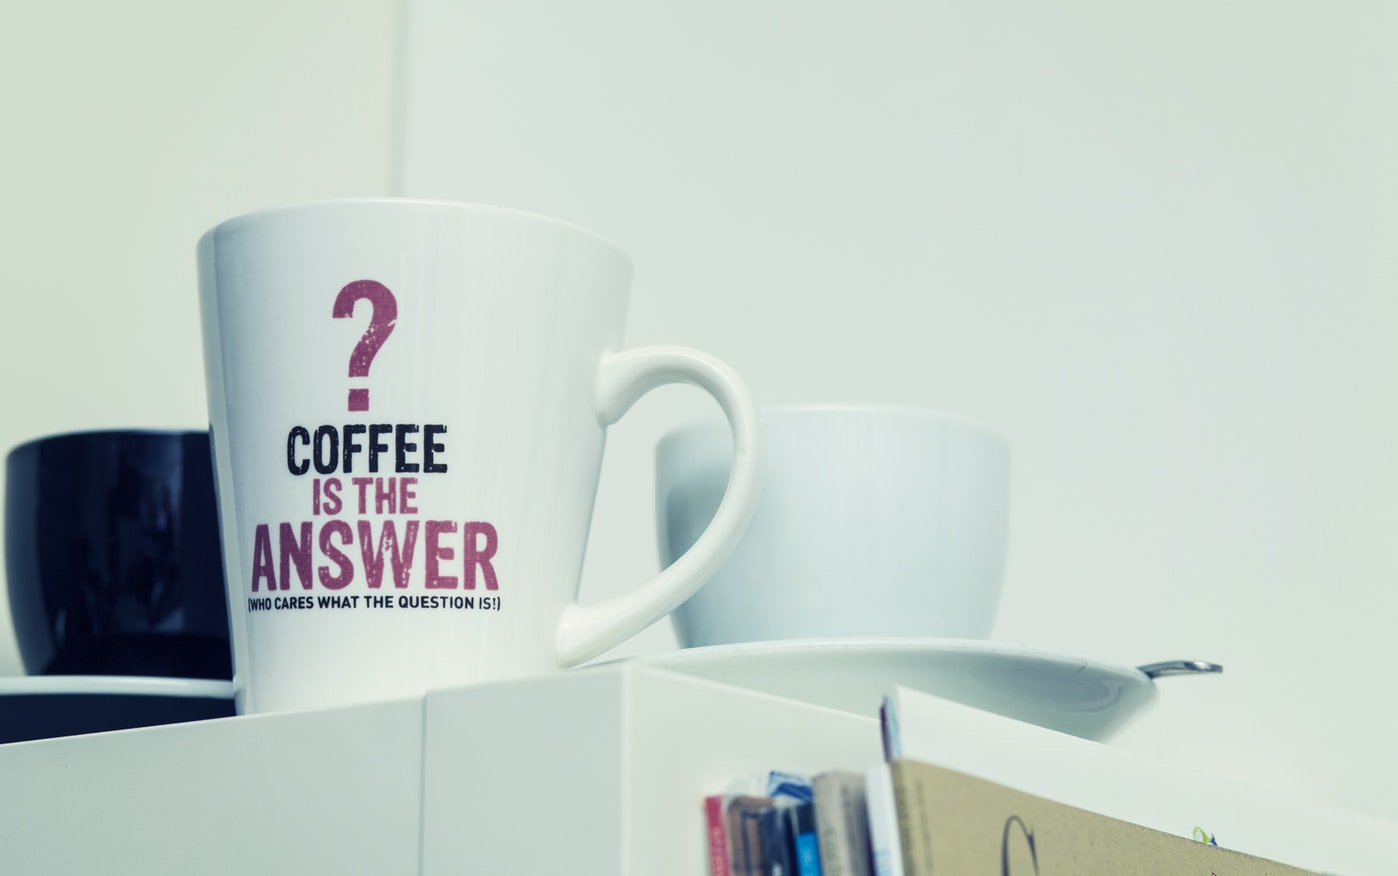 Picture of a cofee mug with a question mug